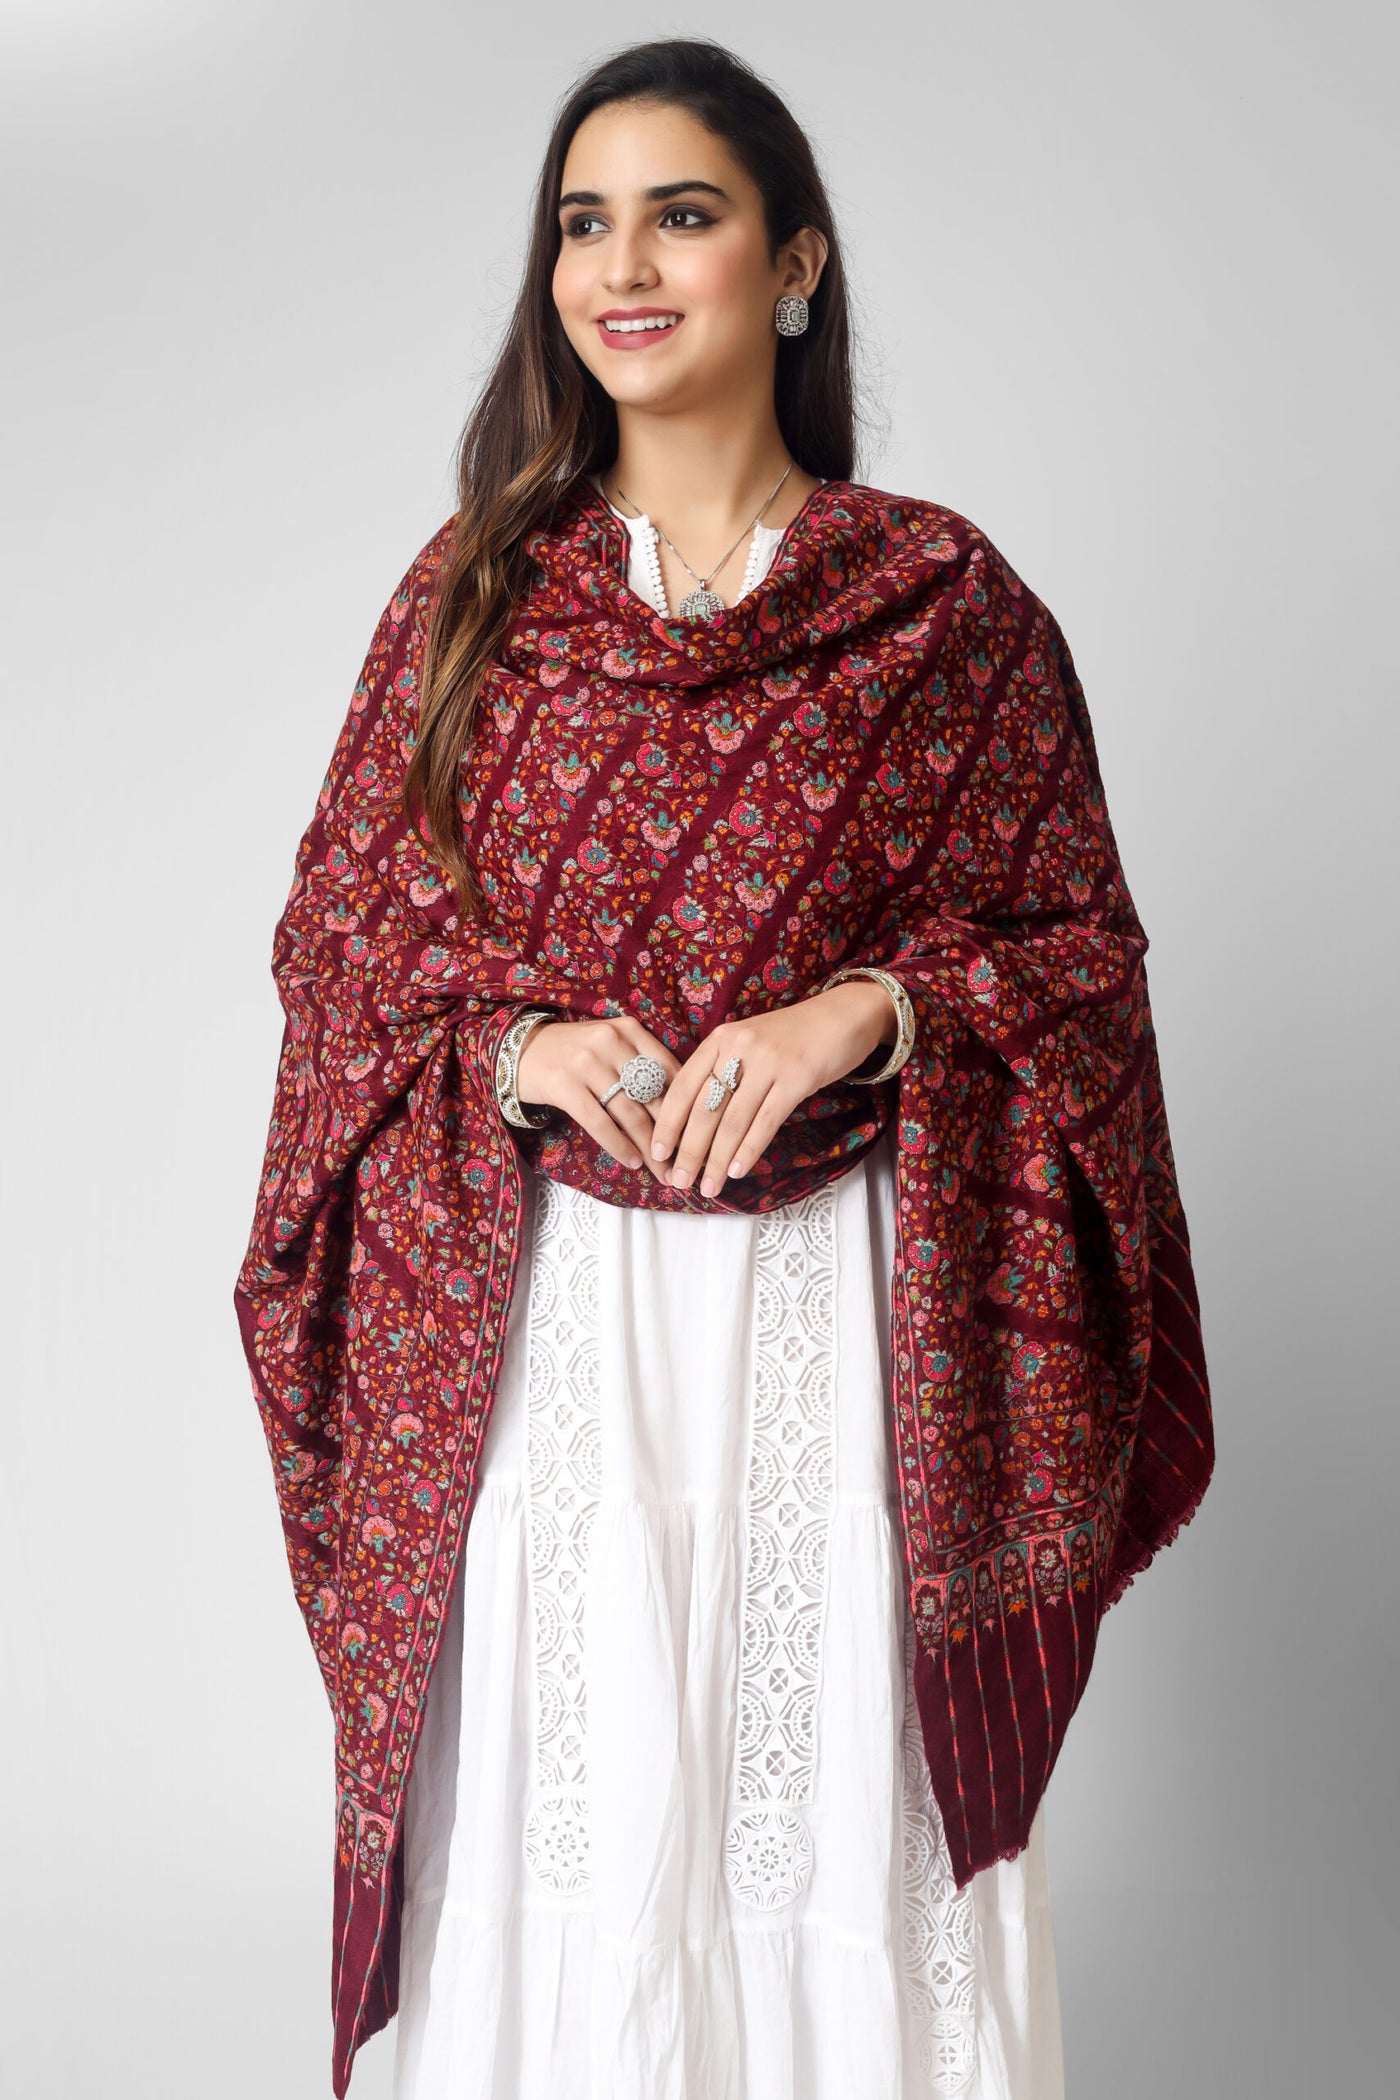  A passionate and ravishing wine color Pashmina Shawl in combination with the legendary paper mache Sozni Embroidery in intricate Jaldaar khatras. 